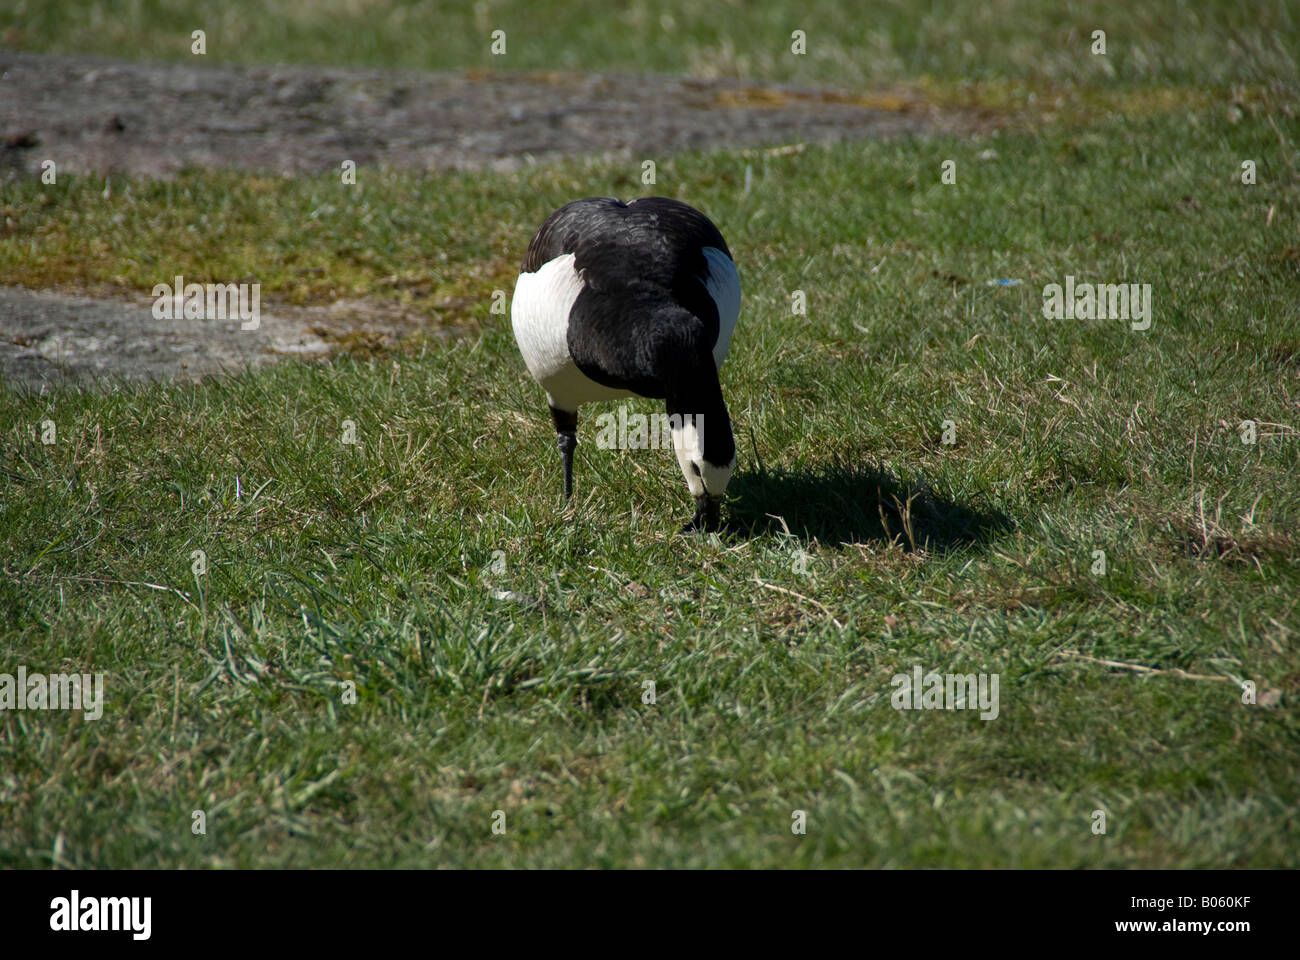 Barnacle goose on a grassy field Stock Photo